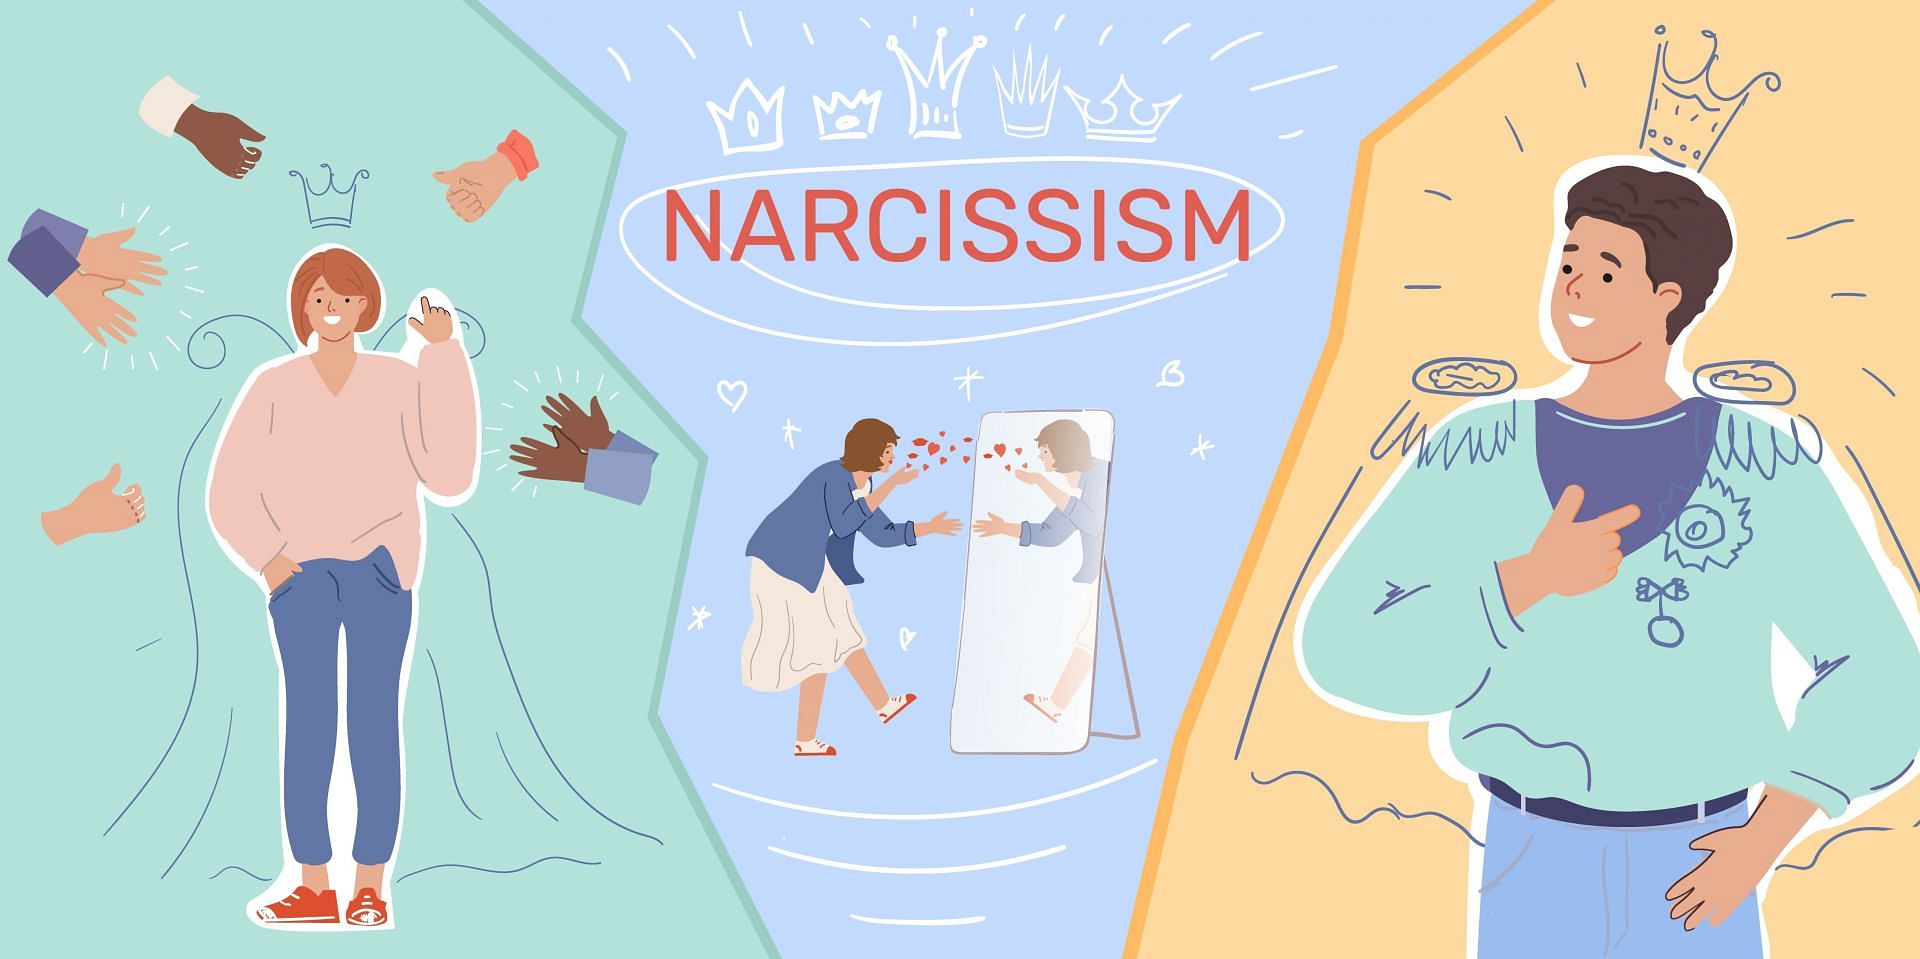 Malignant narcissism can turn into a personality disorder. (Image via Freepik/ Macrovector)